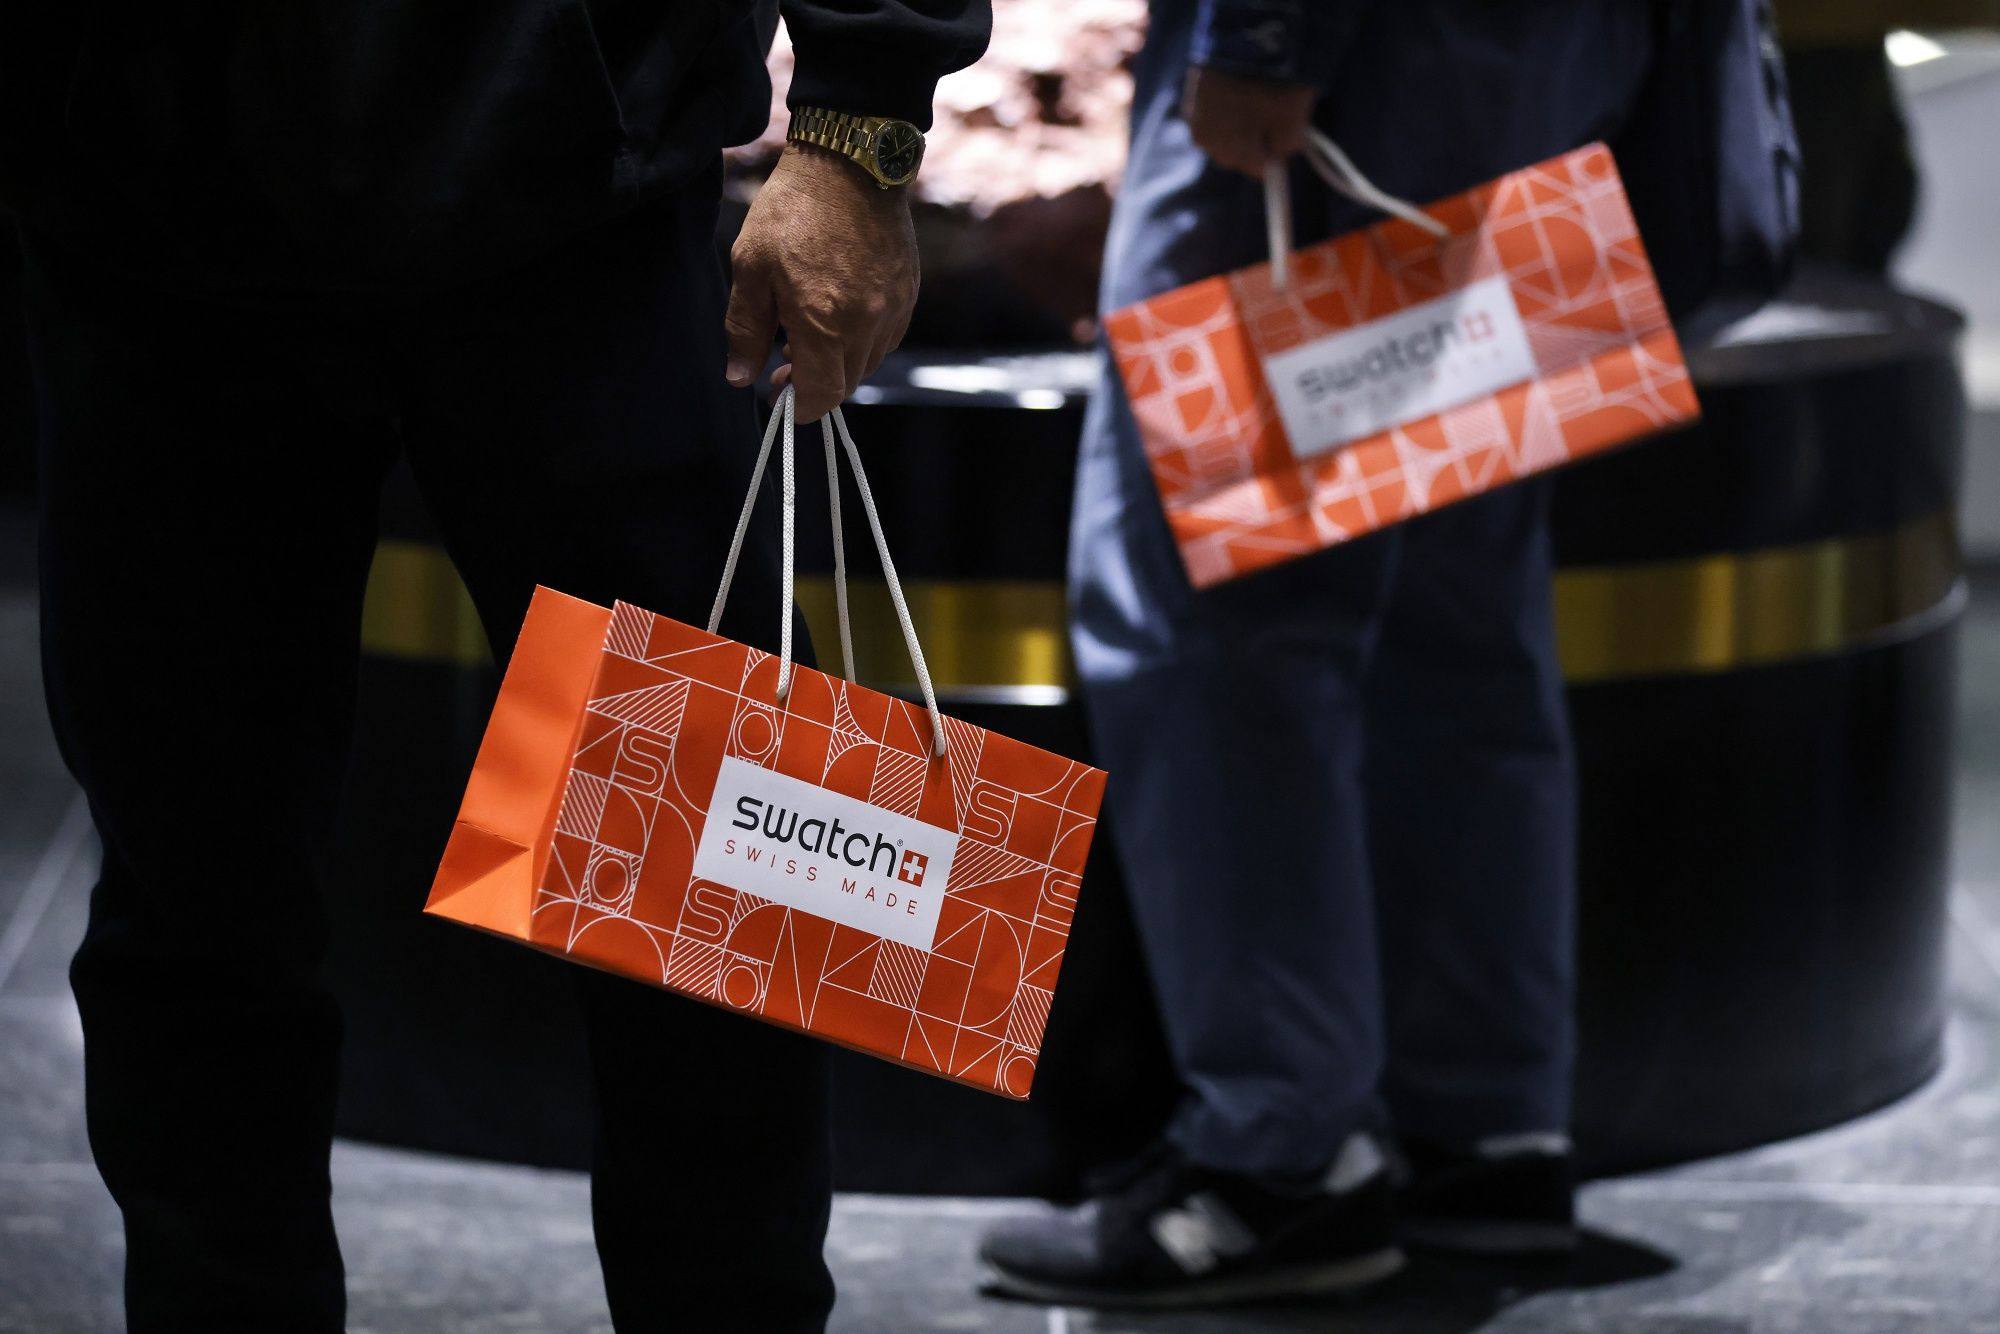 Swatch Group has seen a jump in sales as China’s reopening fuels an optimistic rebound. Photo: Bloomberg